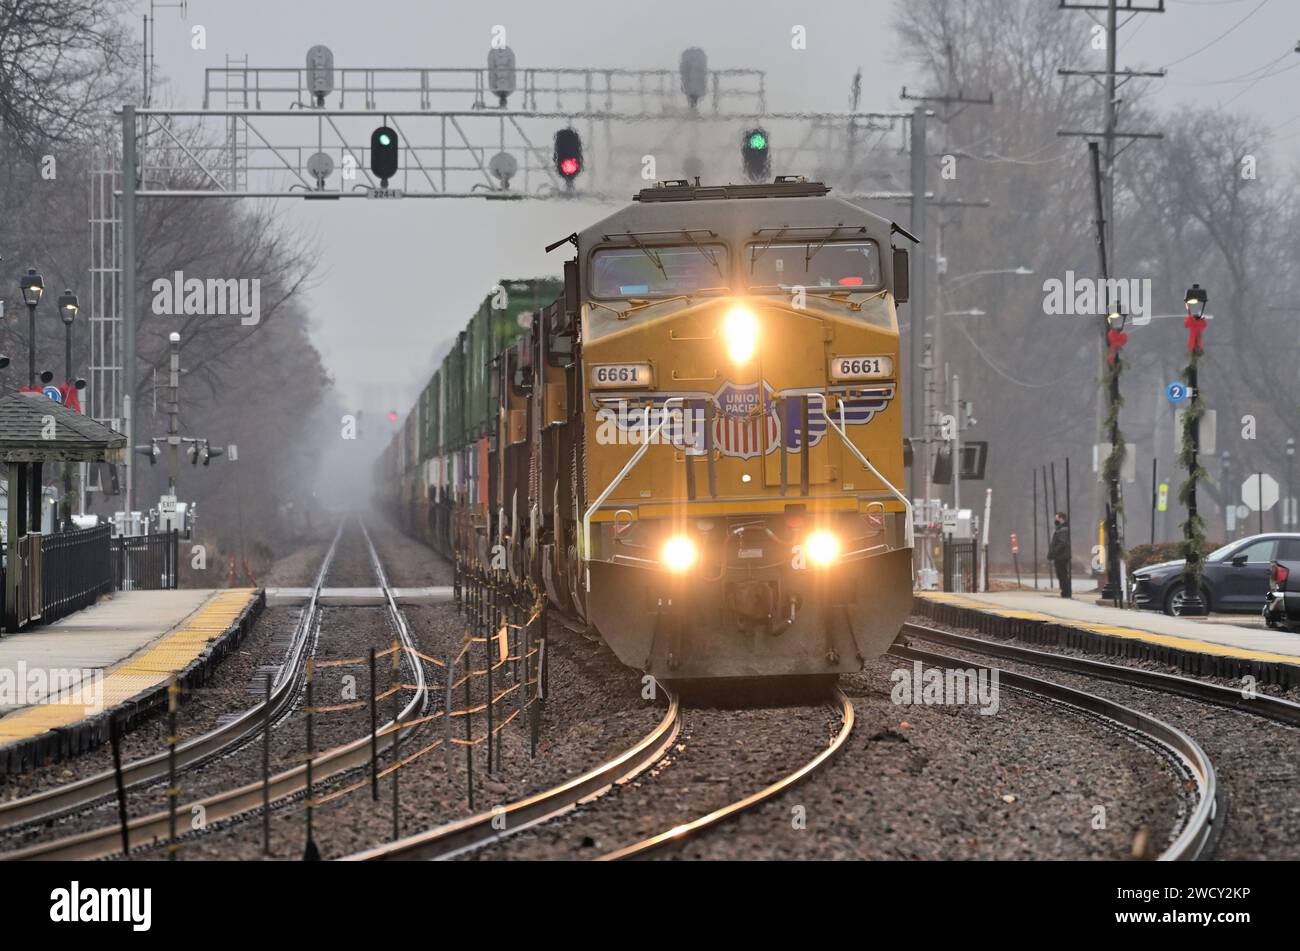 Glen Ellyn, Illinois, USA. On a foggy day, a couple of days before Christmas, multiple locomotives lead a Union Pacific freight train. Stock Photo